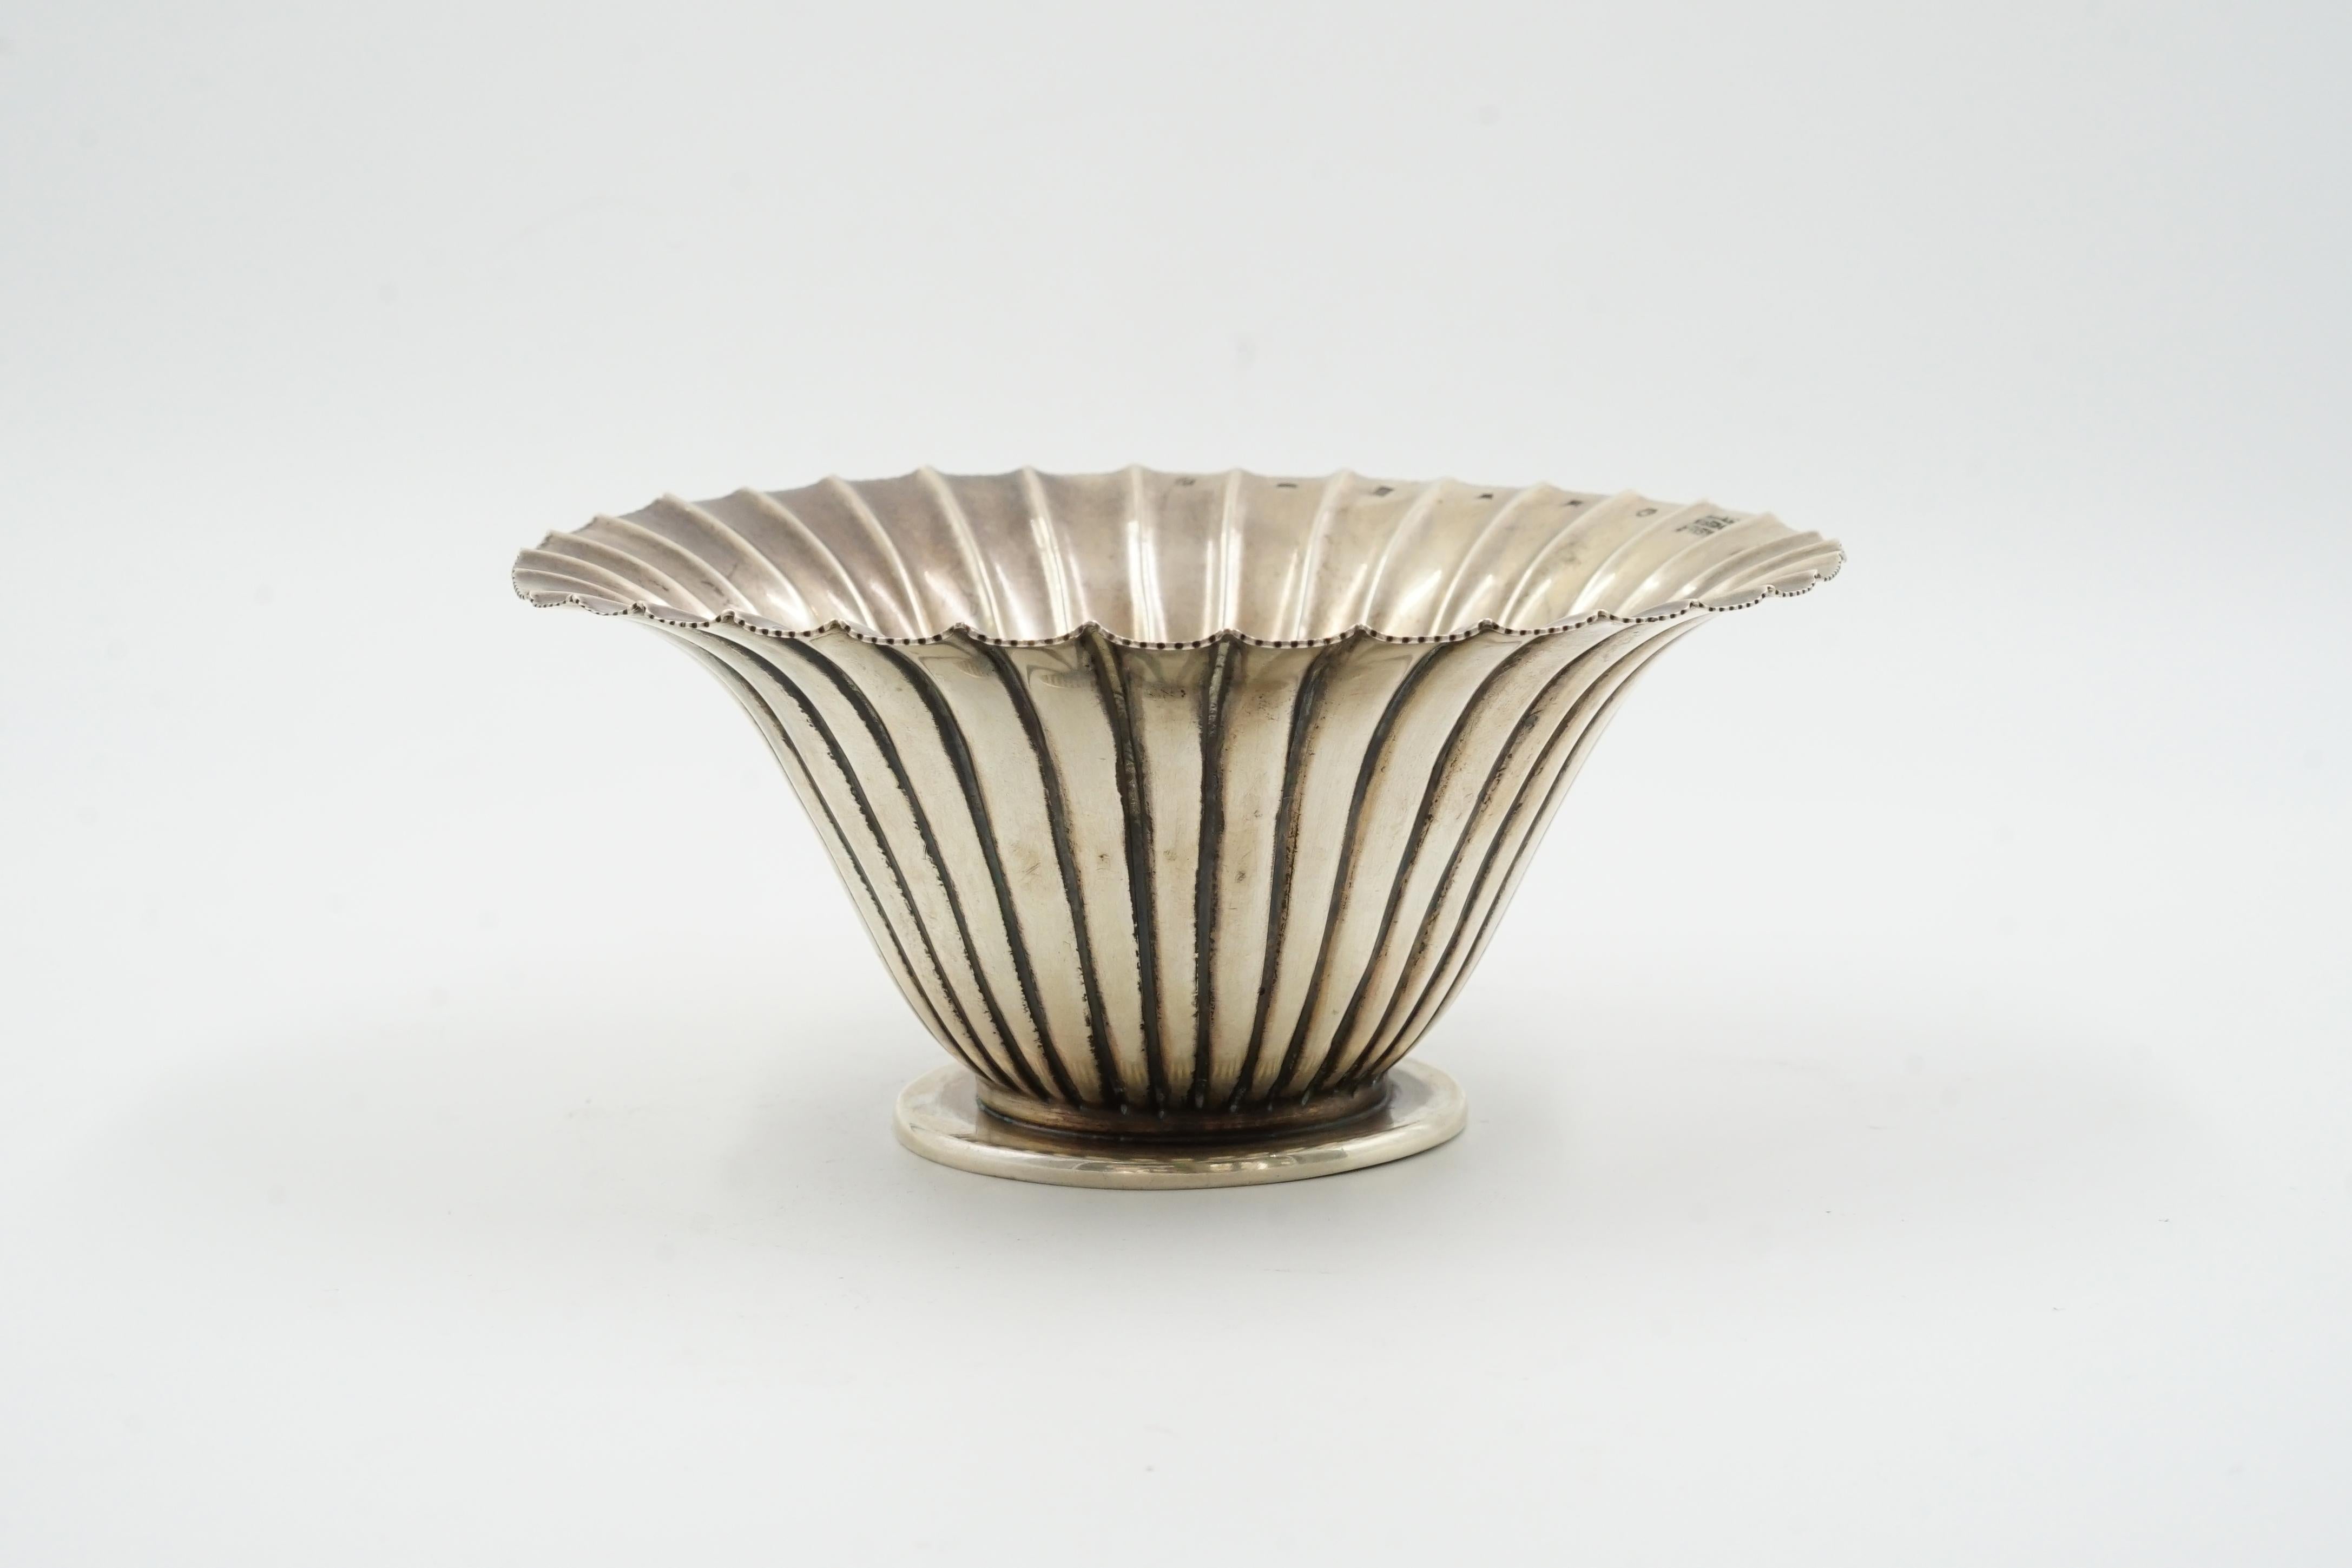 Josef Hoffmann silver bowl
Solid silver bowl
Origin Austria Crica 1925
Vienna Session Style
Design made for Wiener Werkstätte
It has natural wear due to its age.
It is sealed on the top
WEIGHT 135 Grams of solid silver
Josef Hoffmann (December 15,